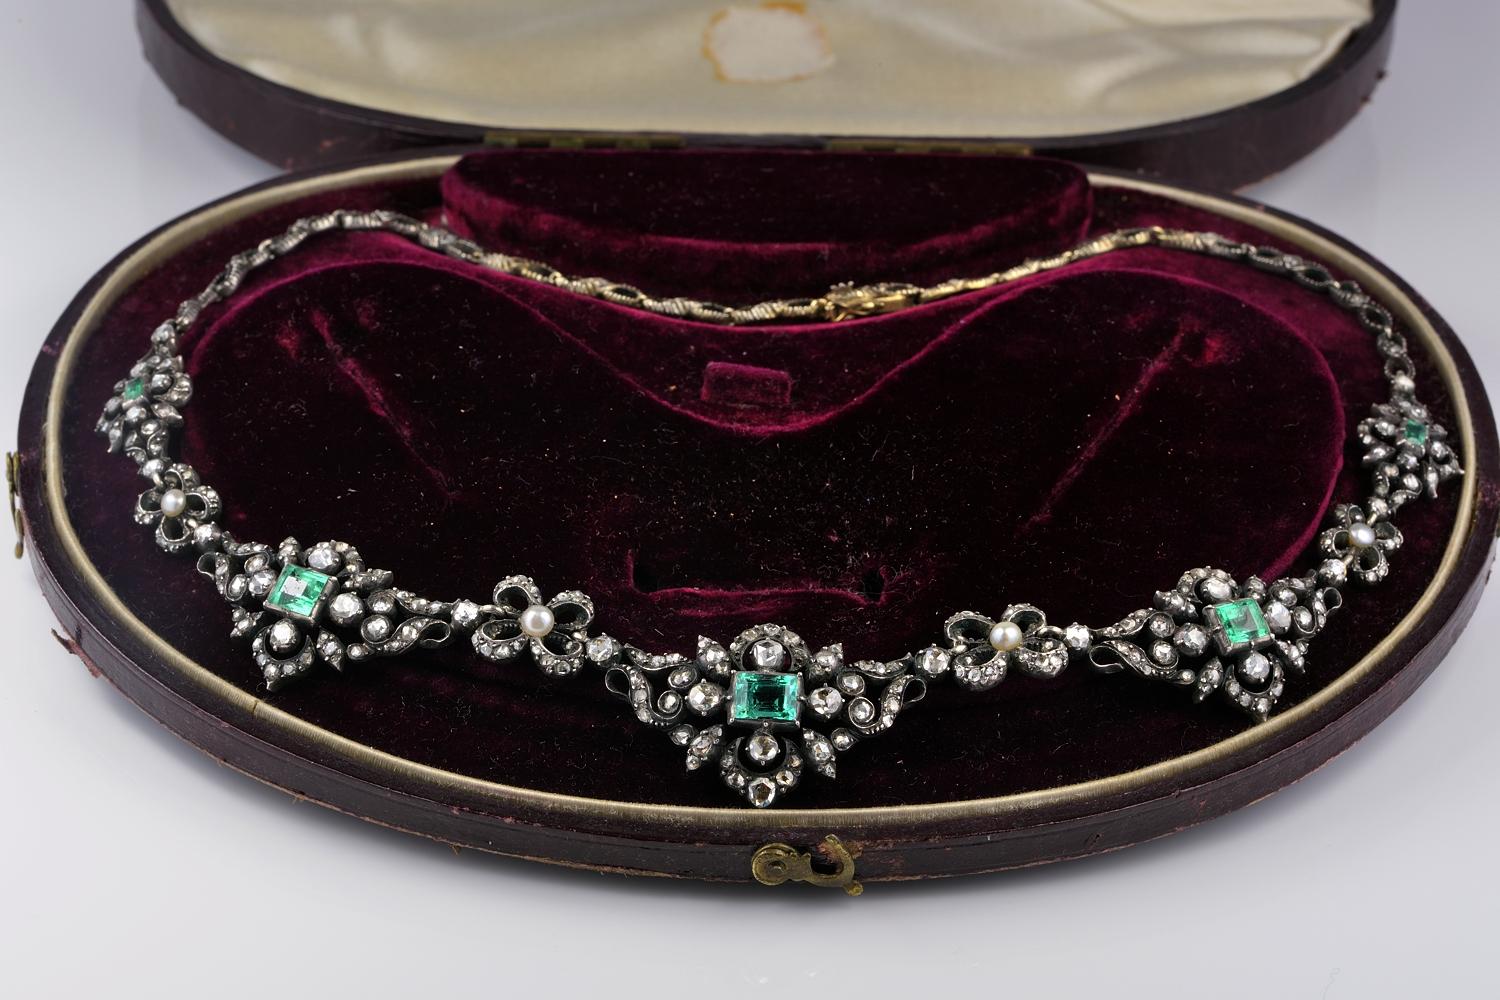 Be a Georgian Lady at evening!

Georgian era jewellery reserved paste stones during the day, Diamond and real gemstones were abundant at night
Here is an exciting mid 18th Century Georgian necklace is what you would have seen worn at evenings by a